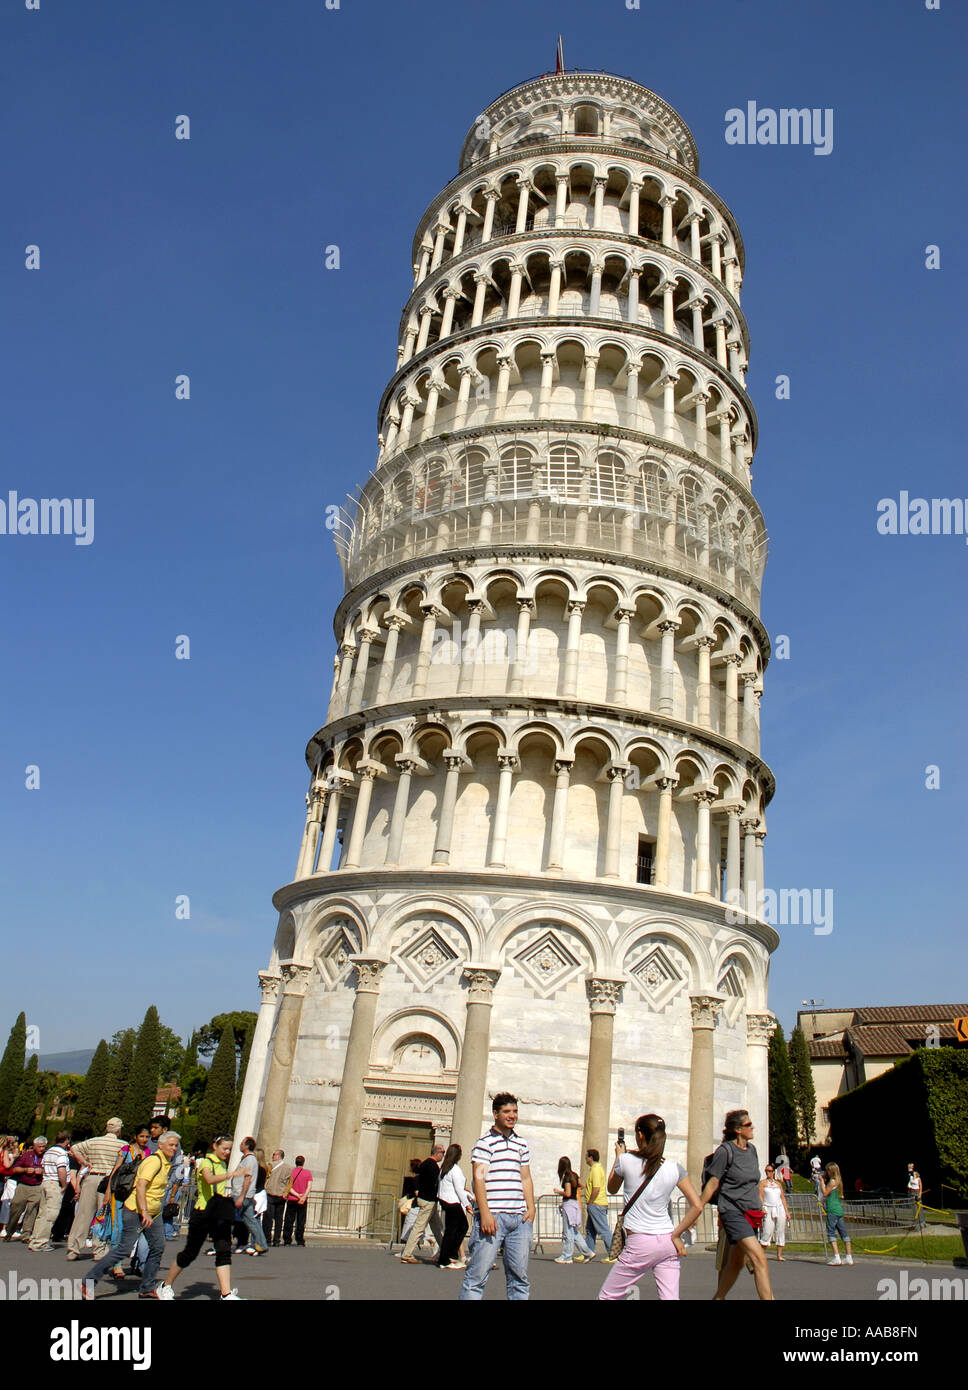 The Leaning Tower of Pisa. The 'Piazza dei Miracoli' undergoing restoration work. Tuscany, Italy. April 2007 Stock Photo